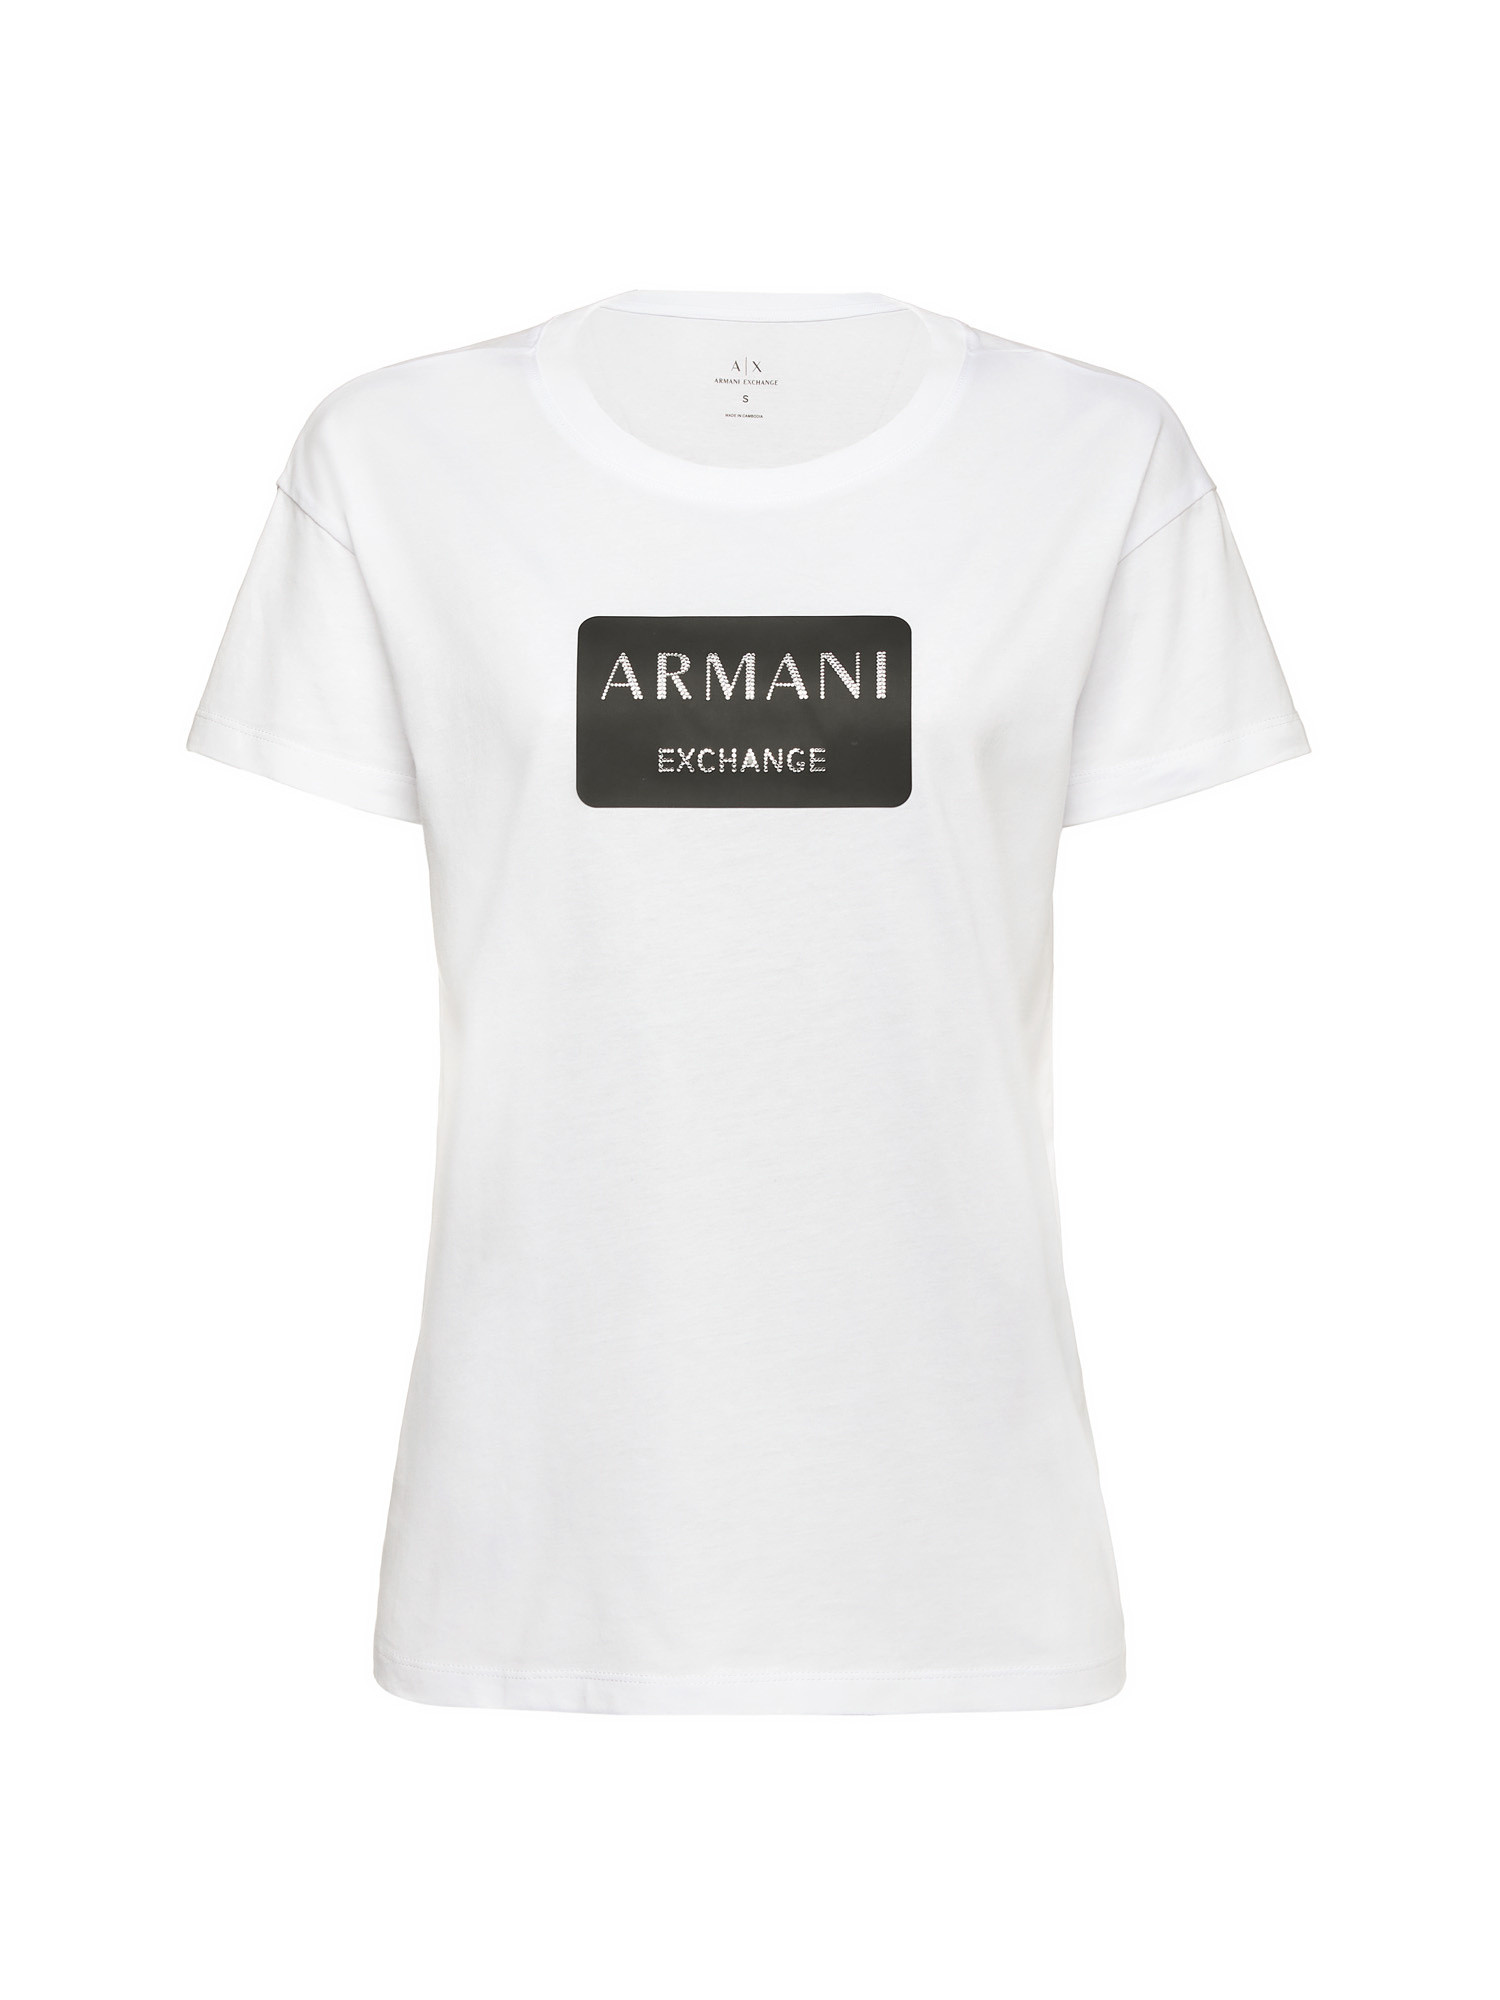 Armani Exchange - Boyfriend fit cotton T-shirt with logo, White, large image number 0